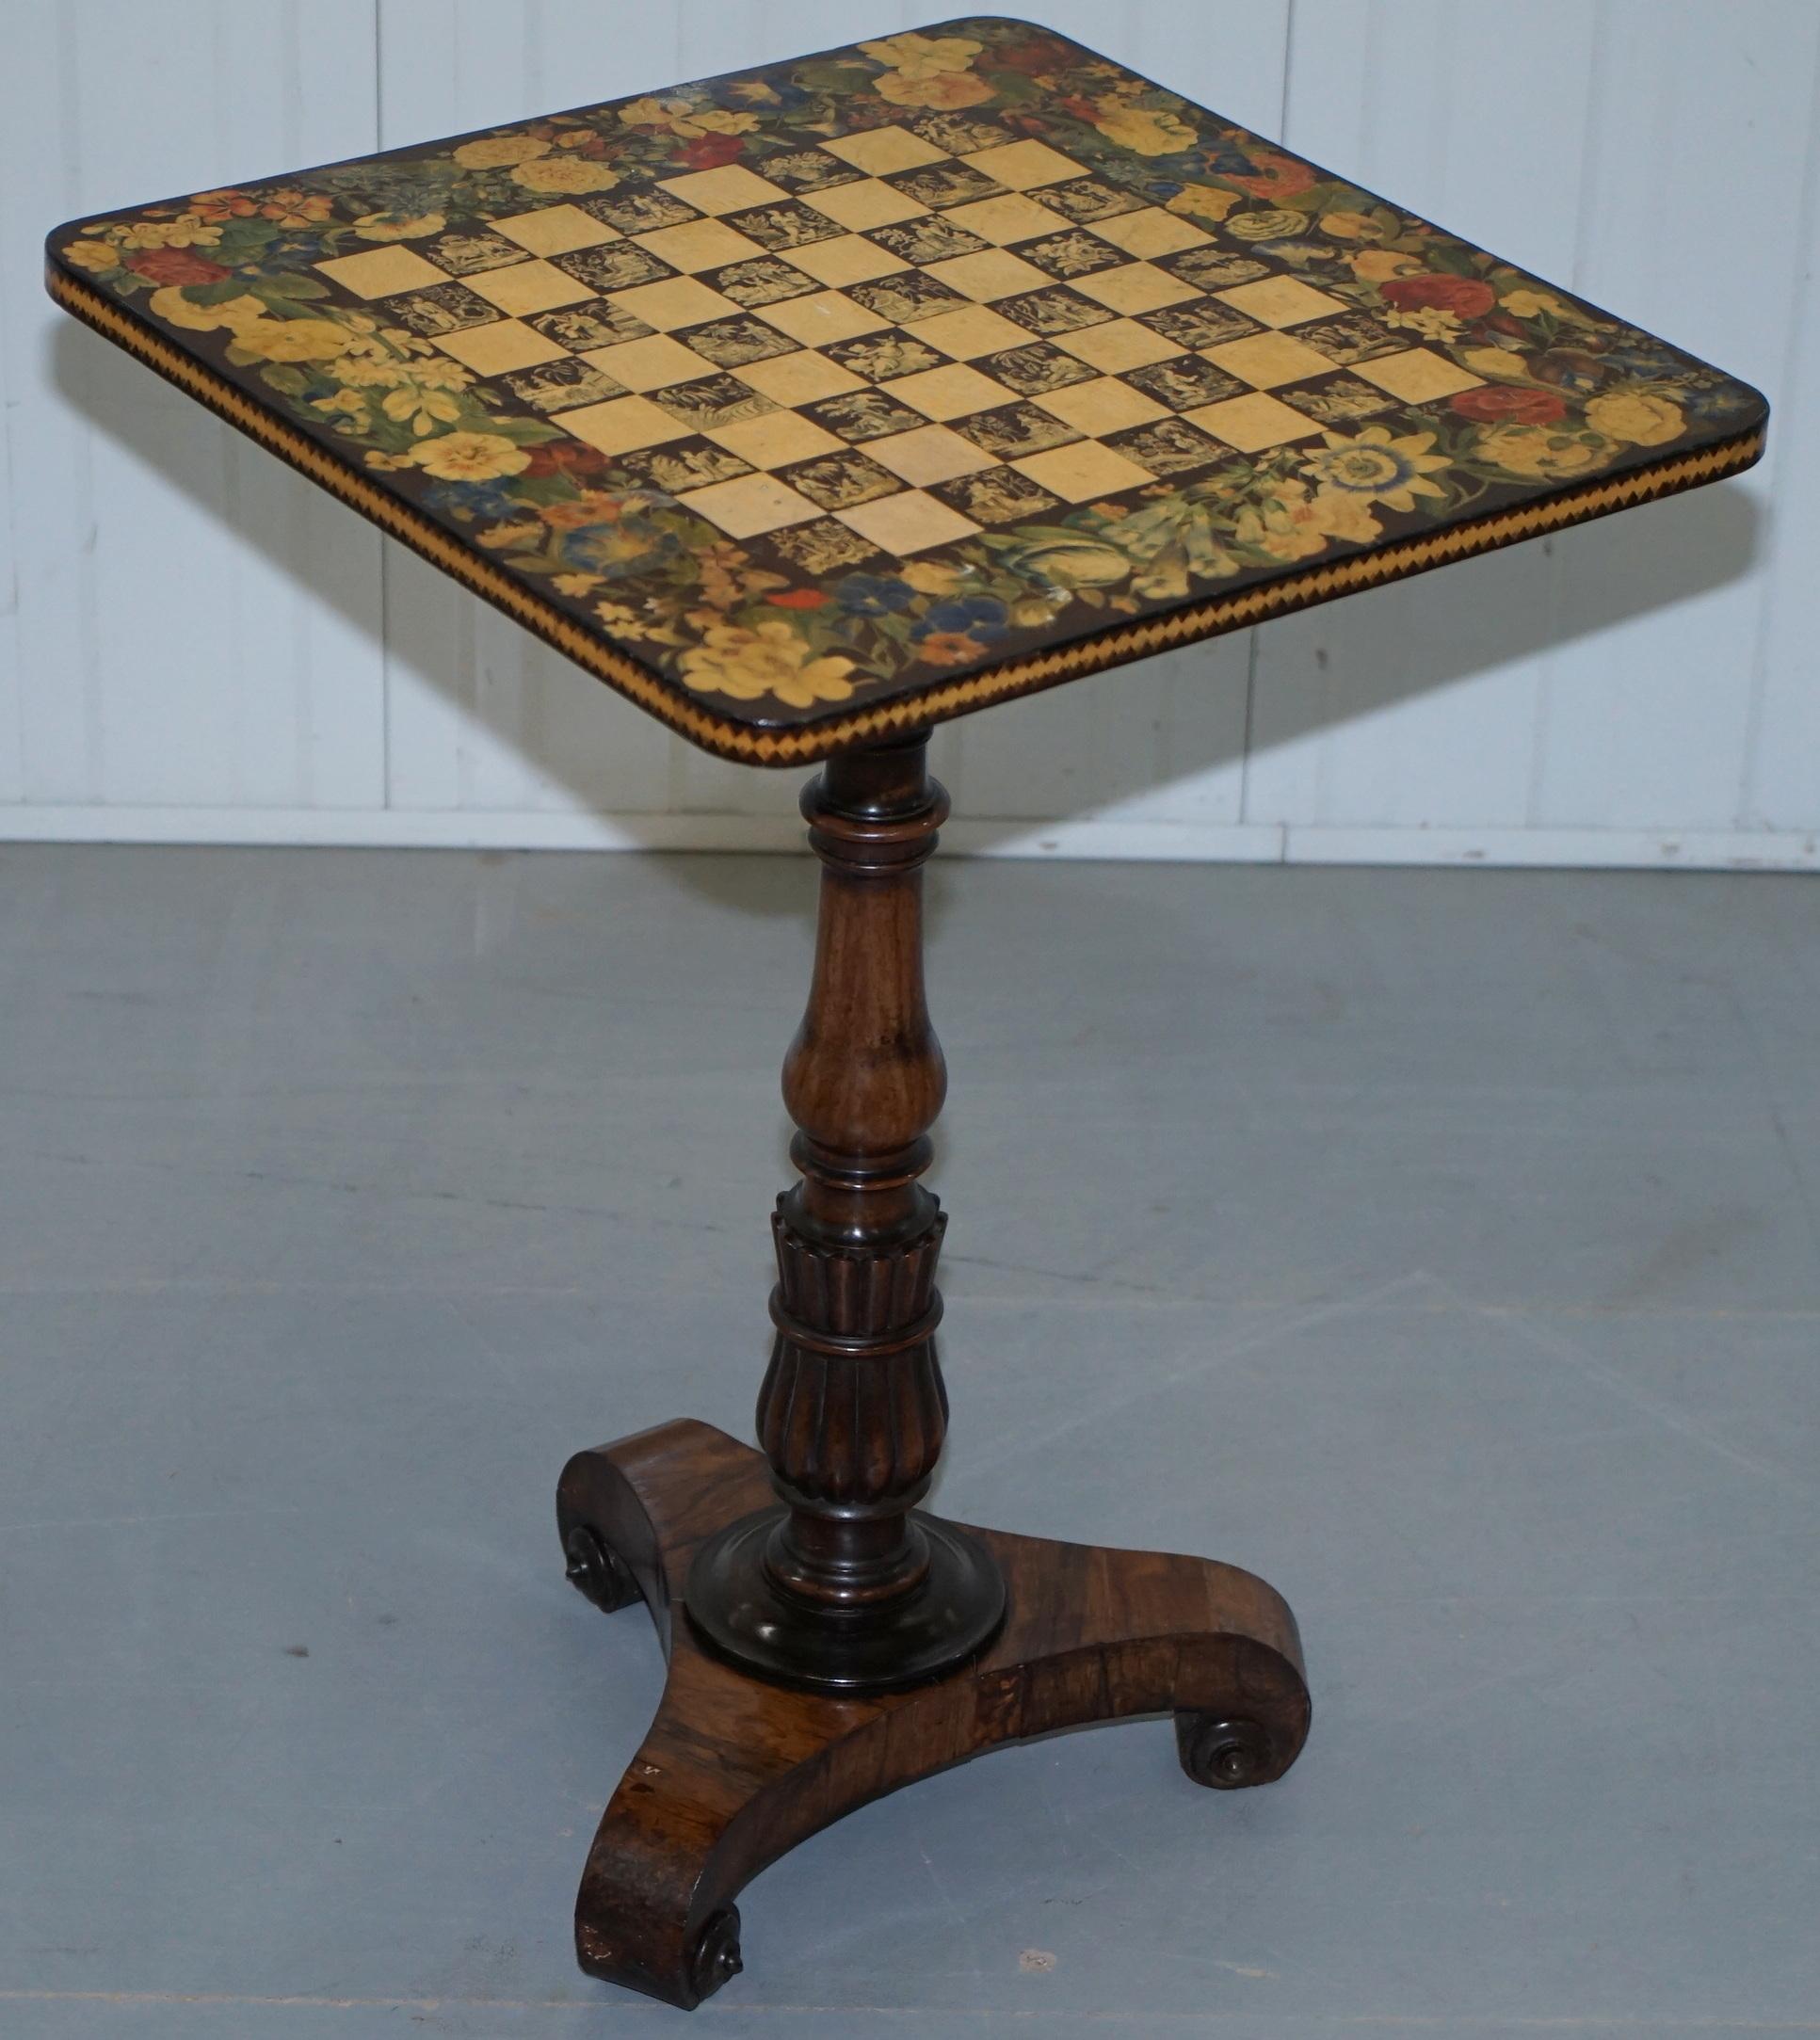 We are delighted to offer for sale this stunning original George IV rosewood Chinoiserie circa 1820 Games tilt top table

This piece is a masterclass of craftsmanship, each white chess square is penwork carved depicting a Chinese scene, some have